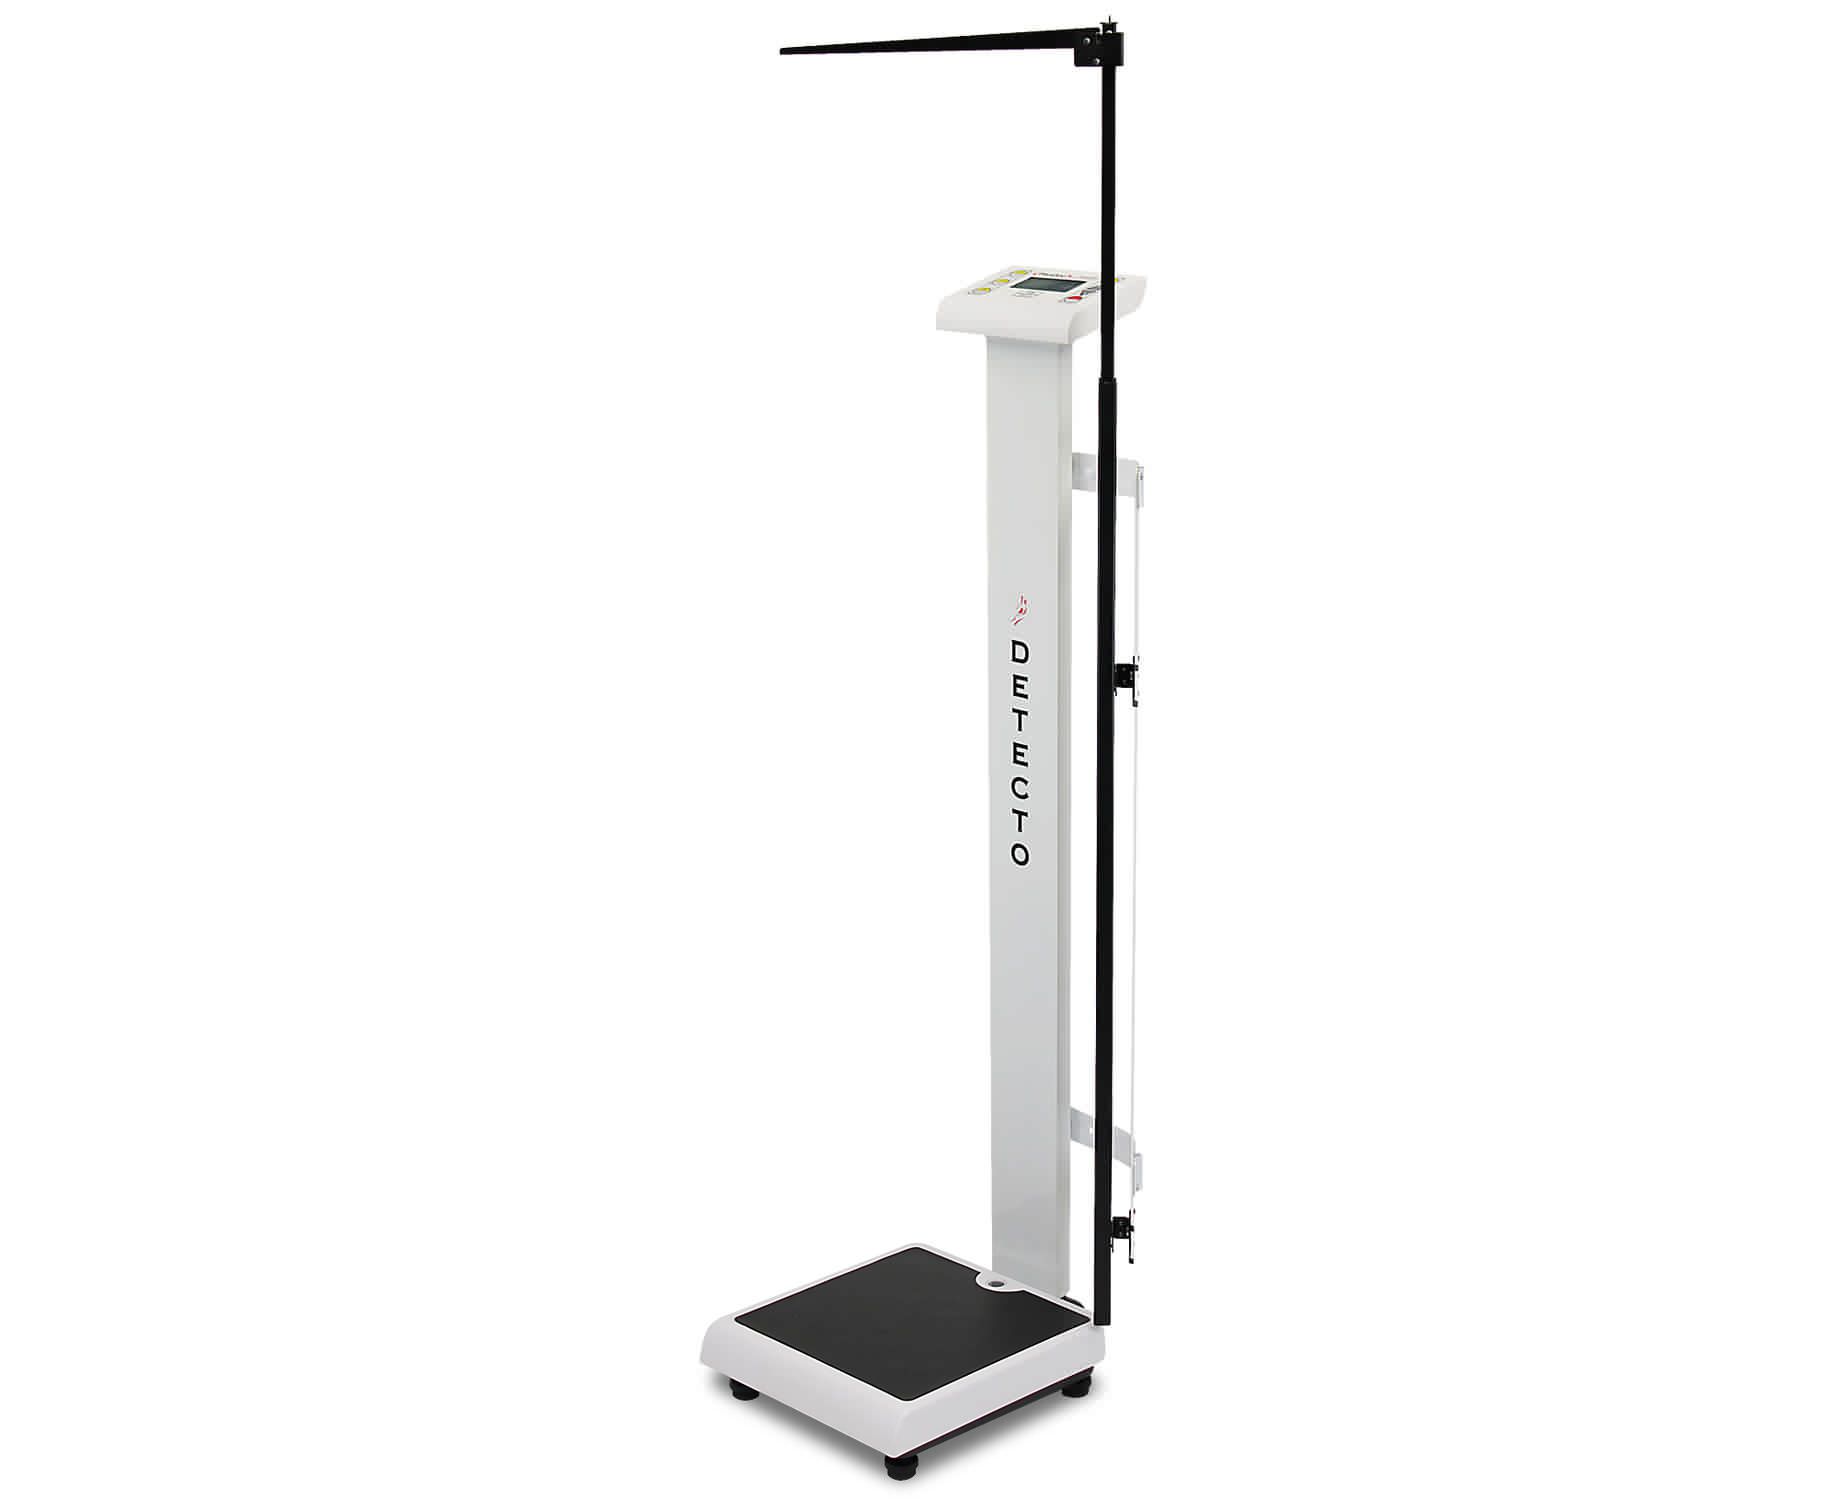 Electronic patient weighing scale / column type / with BMI calculation / with height rod 250 kg | PD300MHR Detecto Scale